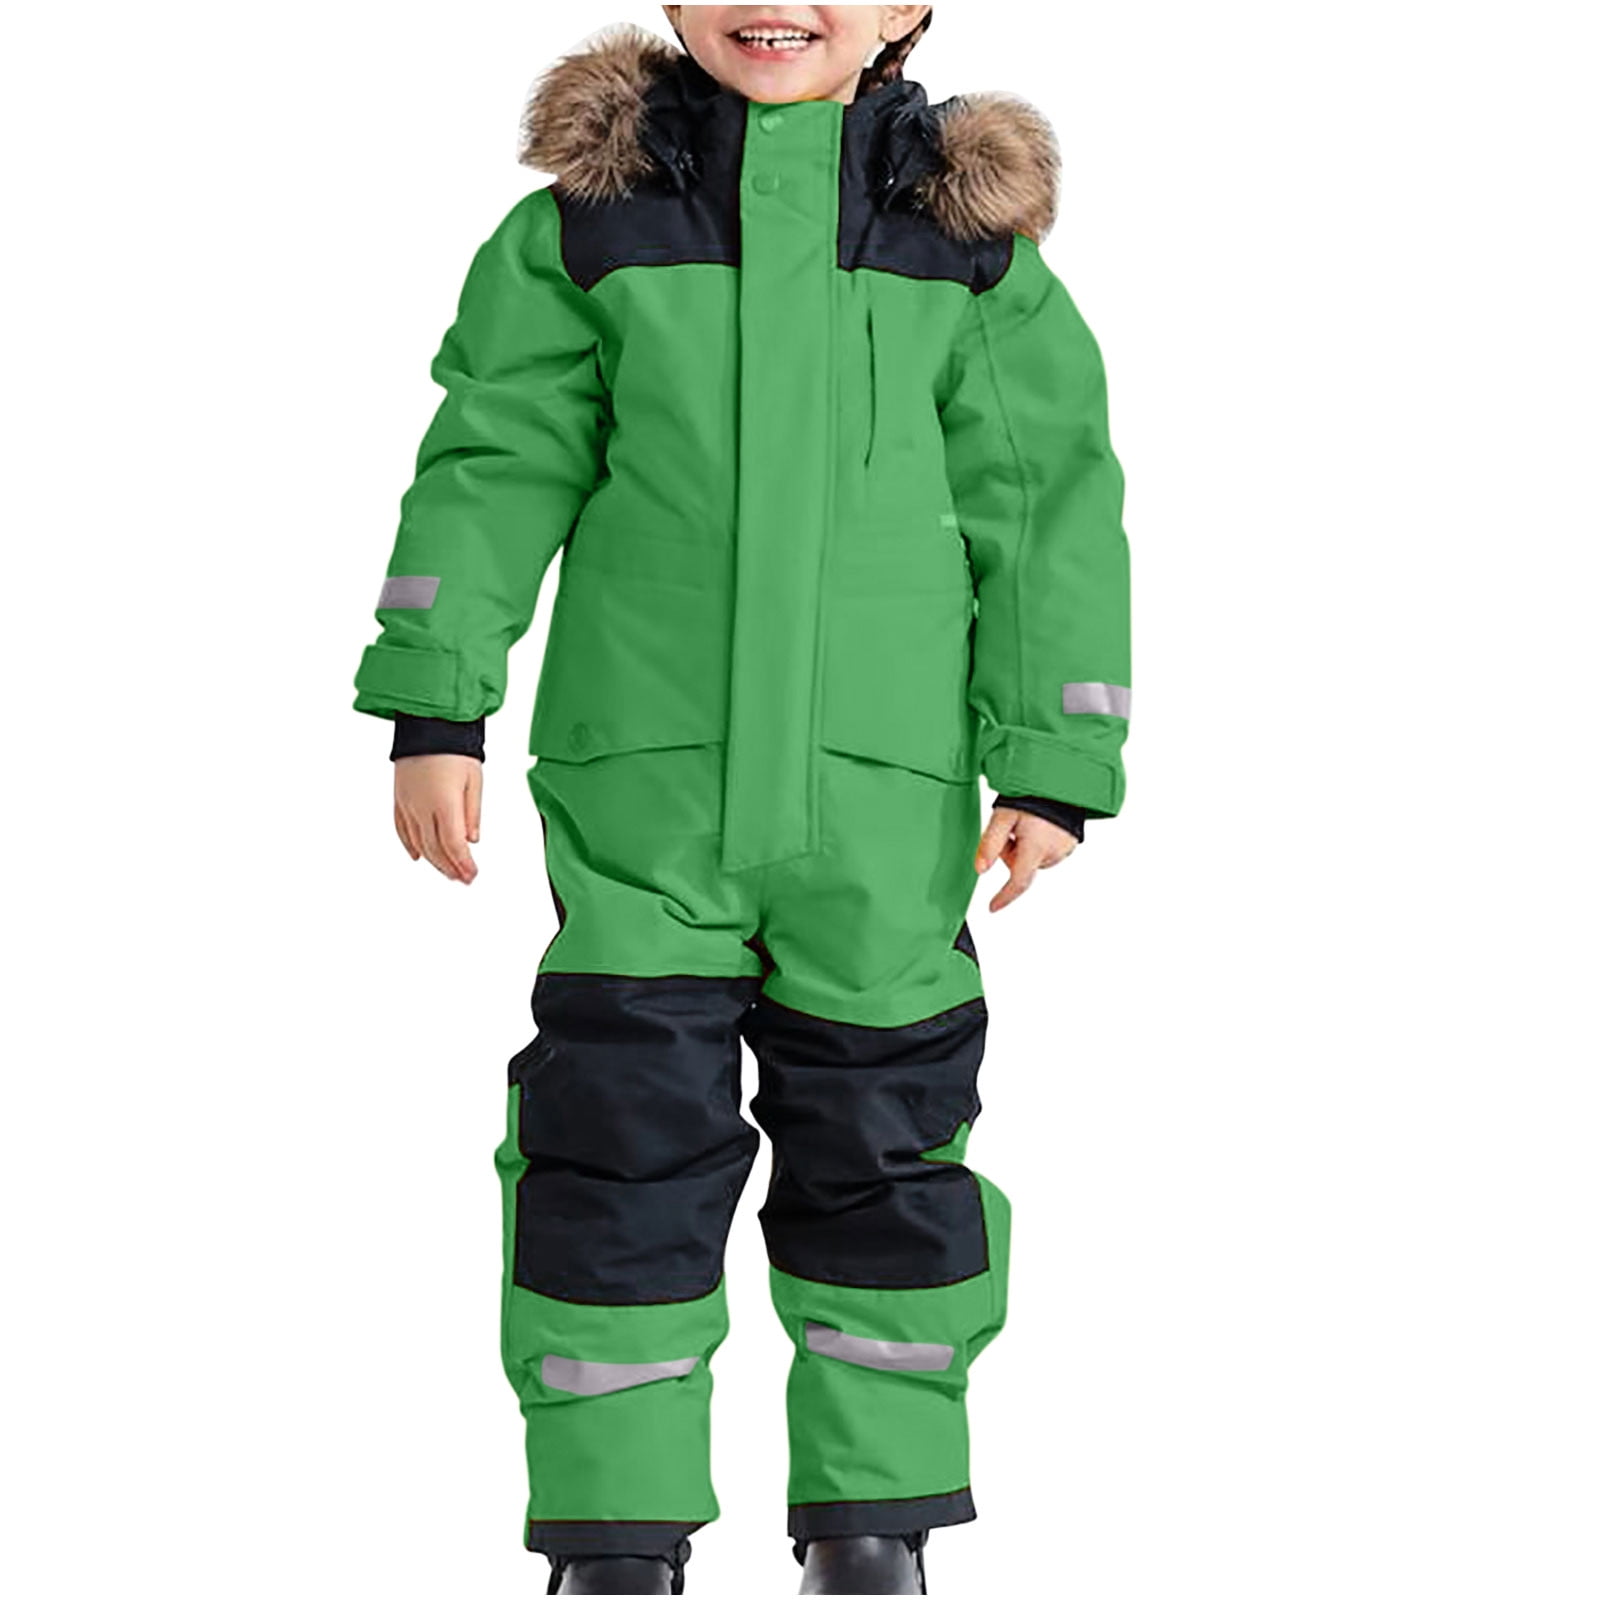 BELLZELY Toddler Boys Clothes Clearance Kids Girls Boys Waterproof ...